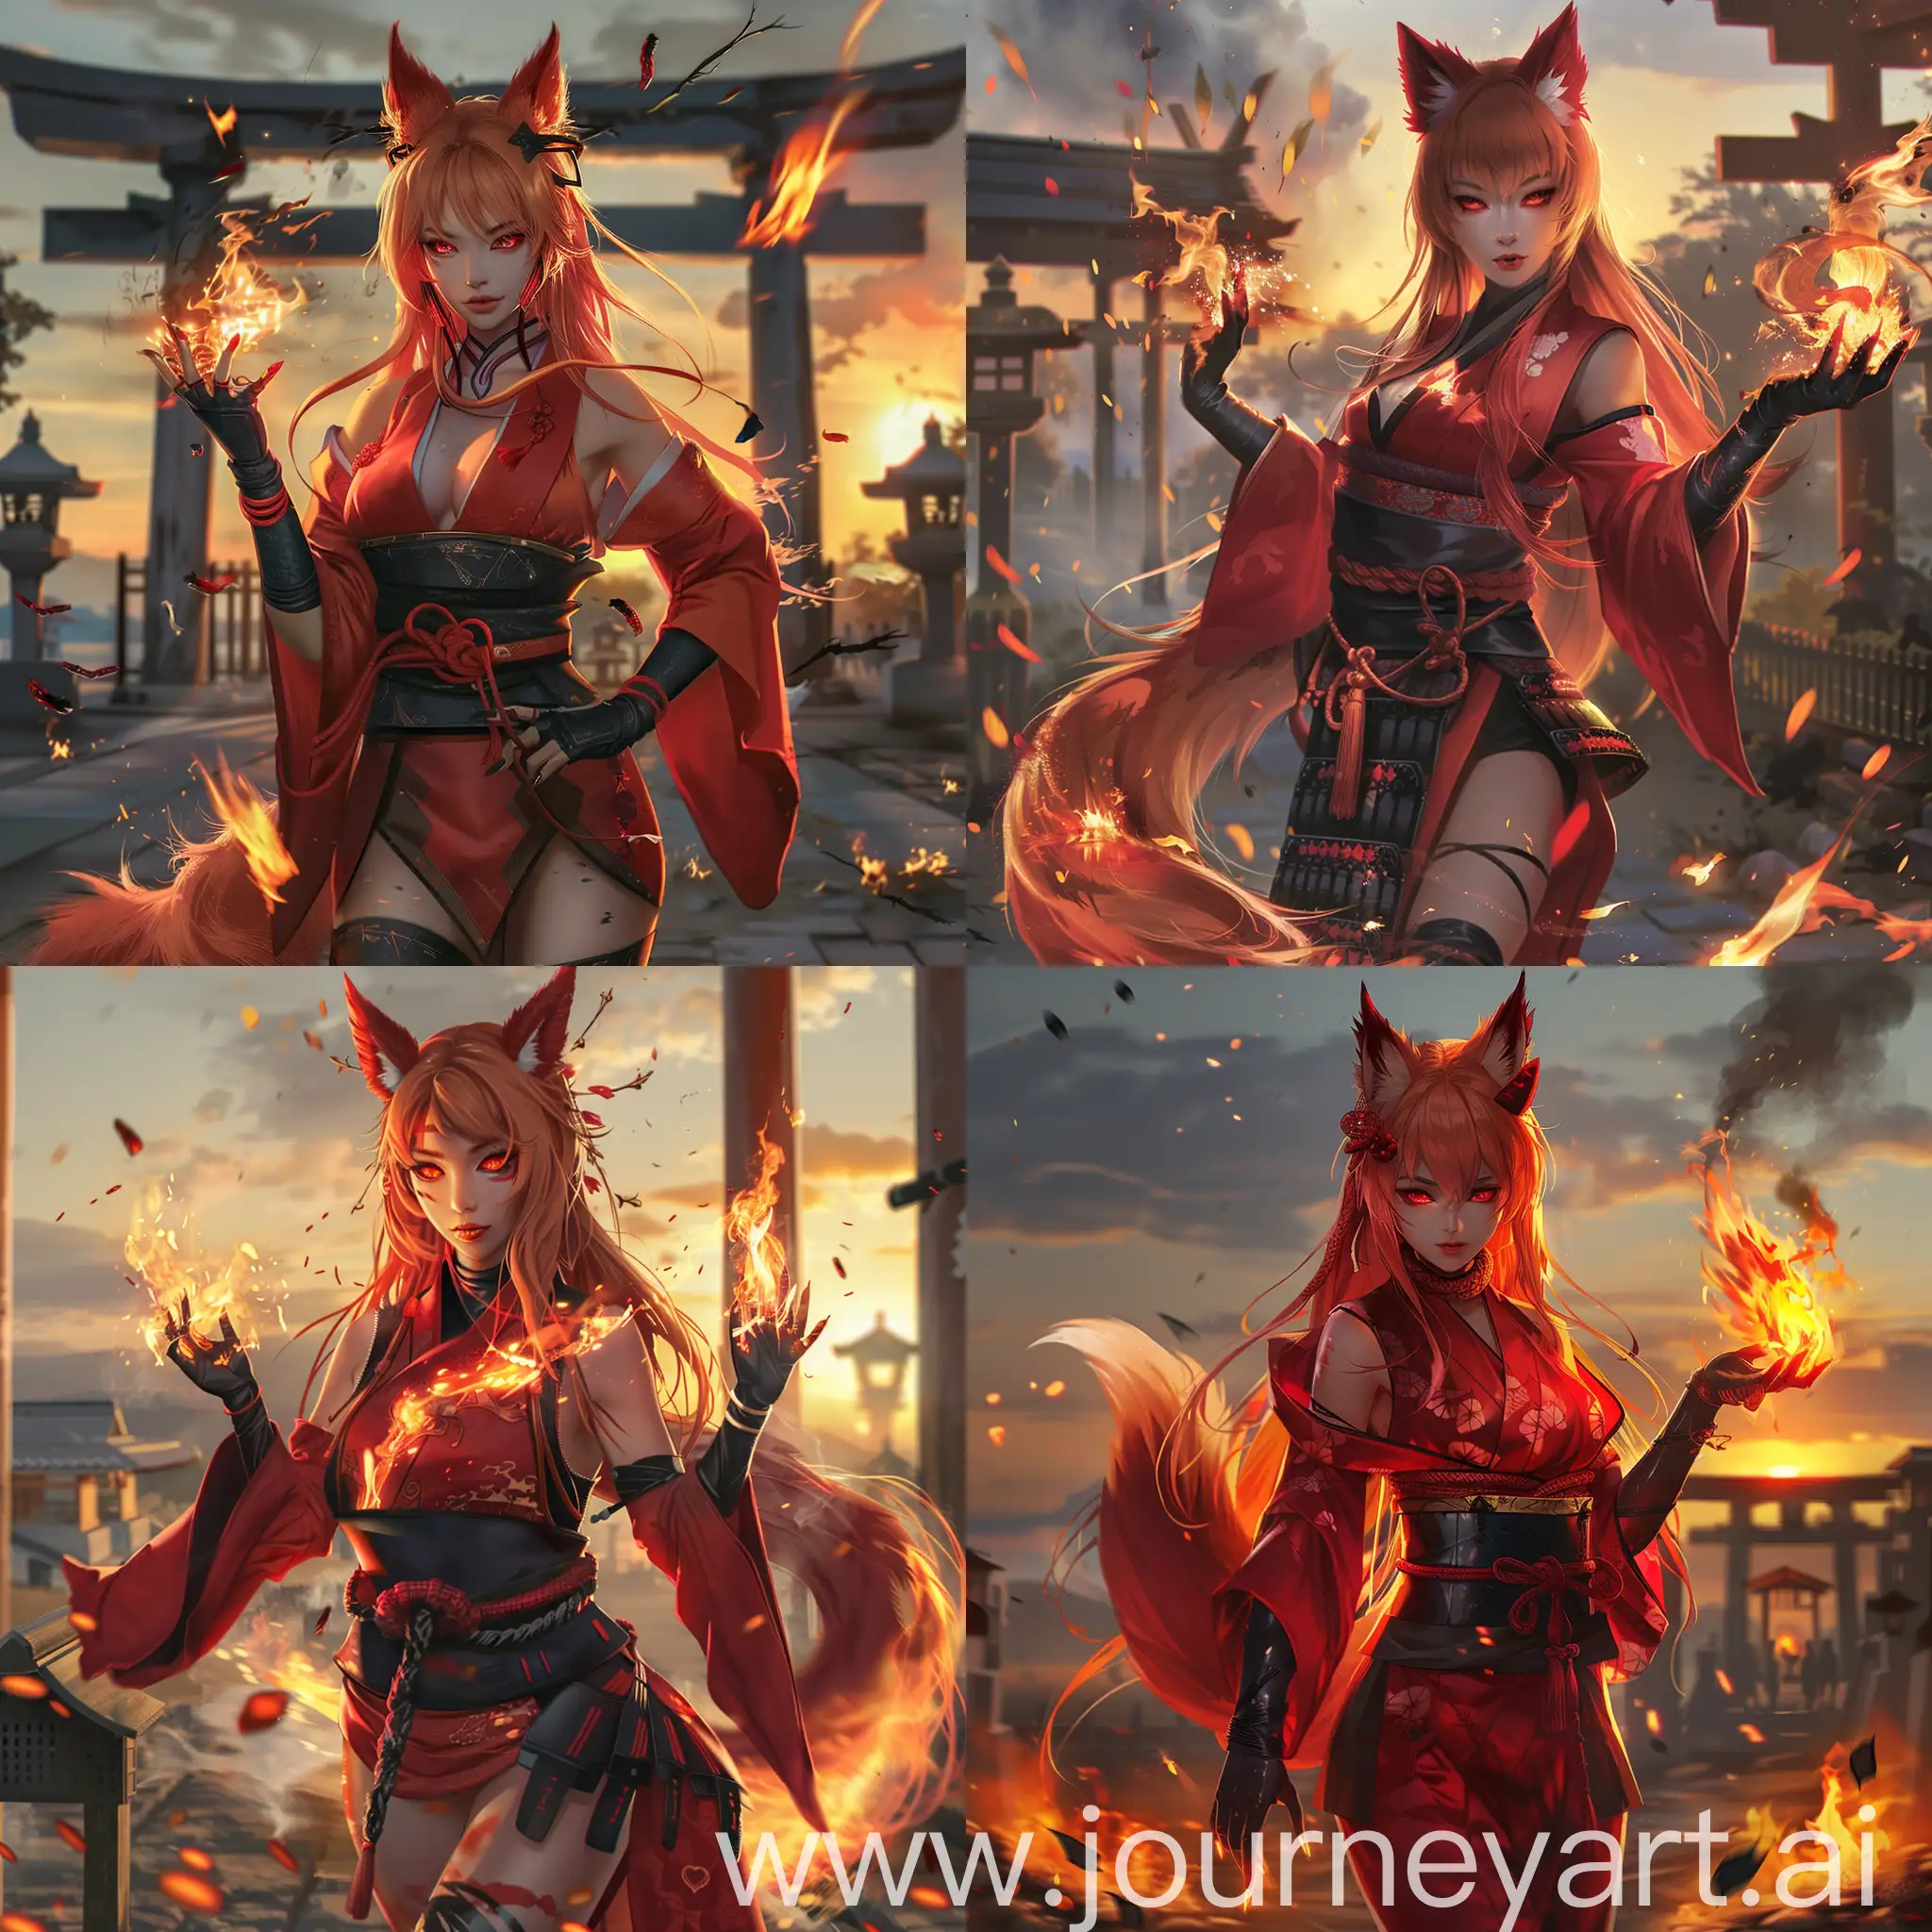 anime-style, full body, athletic, beautiful, tan skin, asian woman, long fiery red hair, red fox ears, red fox tail attached to her waist, fiery red eyes, wearing a red kimono, black hakama, black sash, long black gloves, black leather boots, casting fire magic, hands wrapped in fire,  good anatomy, dynamic, embers falling in foreground, shinto shrine, sunset